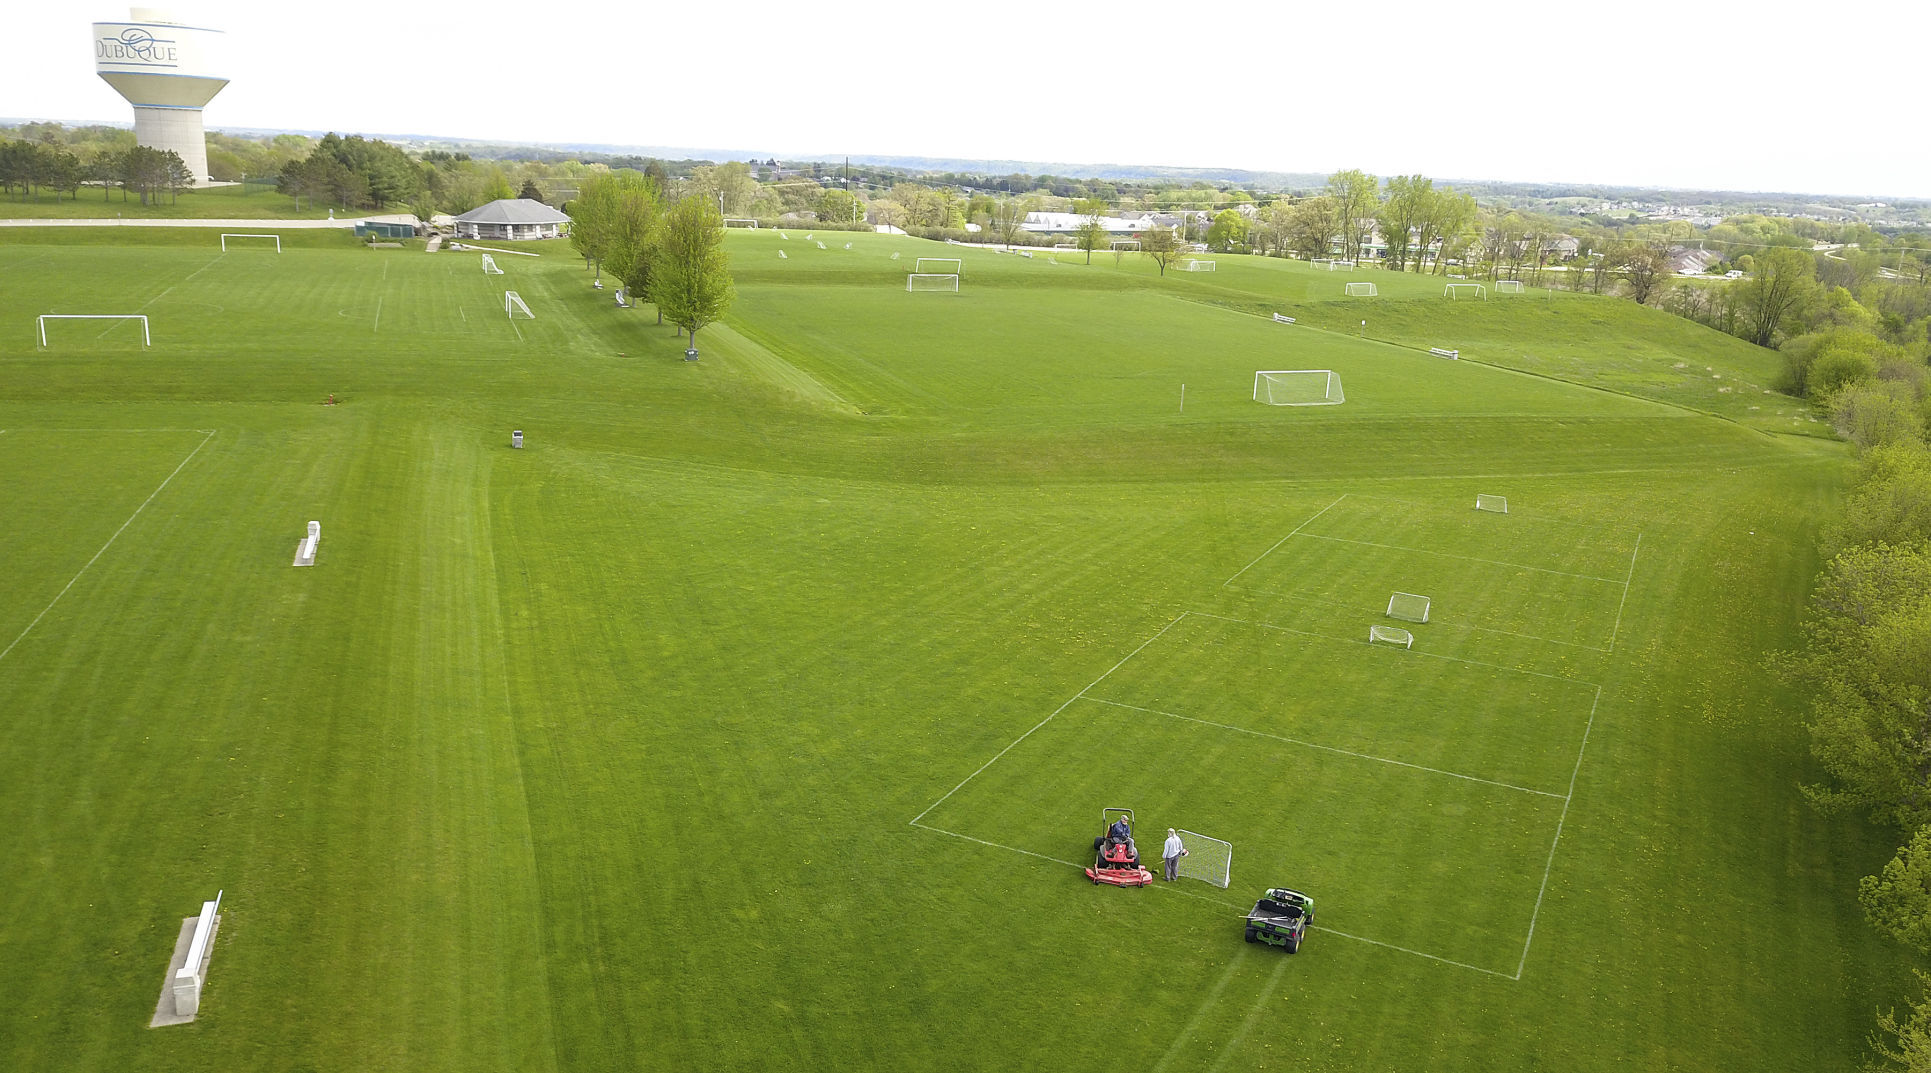 Workers groom one of the soccer fields at the Dubuque Soccer Complex on Tuesday. Dubuque Community Schools leaders are looking to sell the property to the Dubuque Soccer Alliance when the current lease expires. PHOTO CREDIT: Dave Kettering